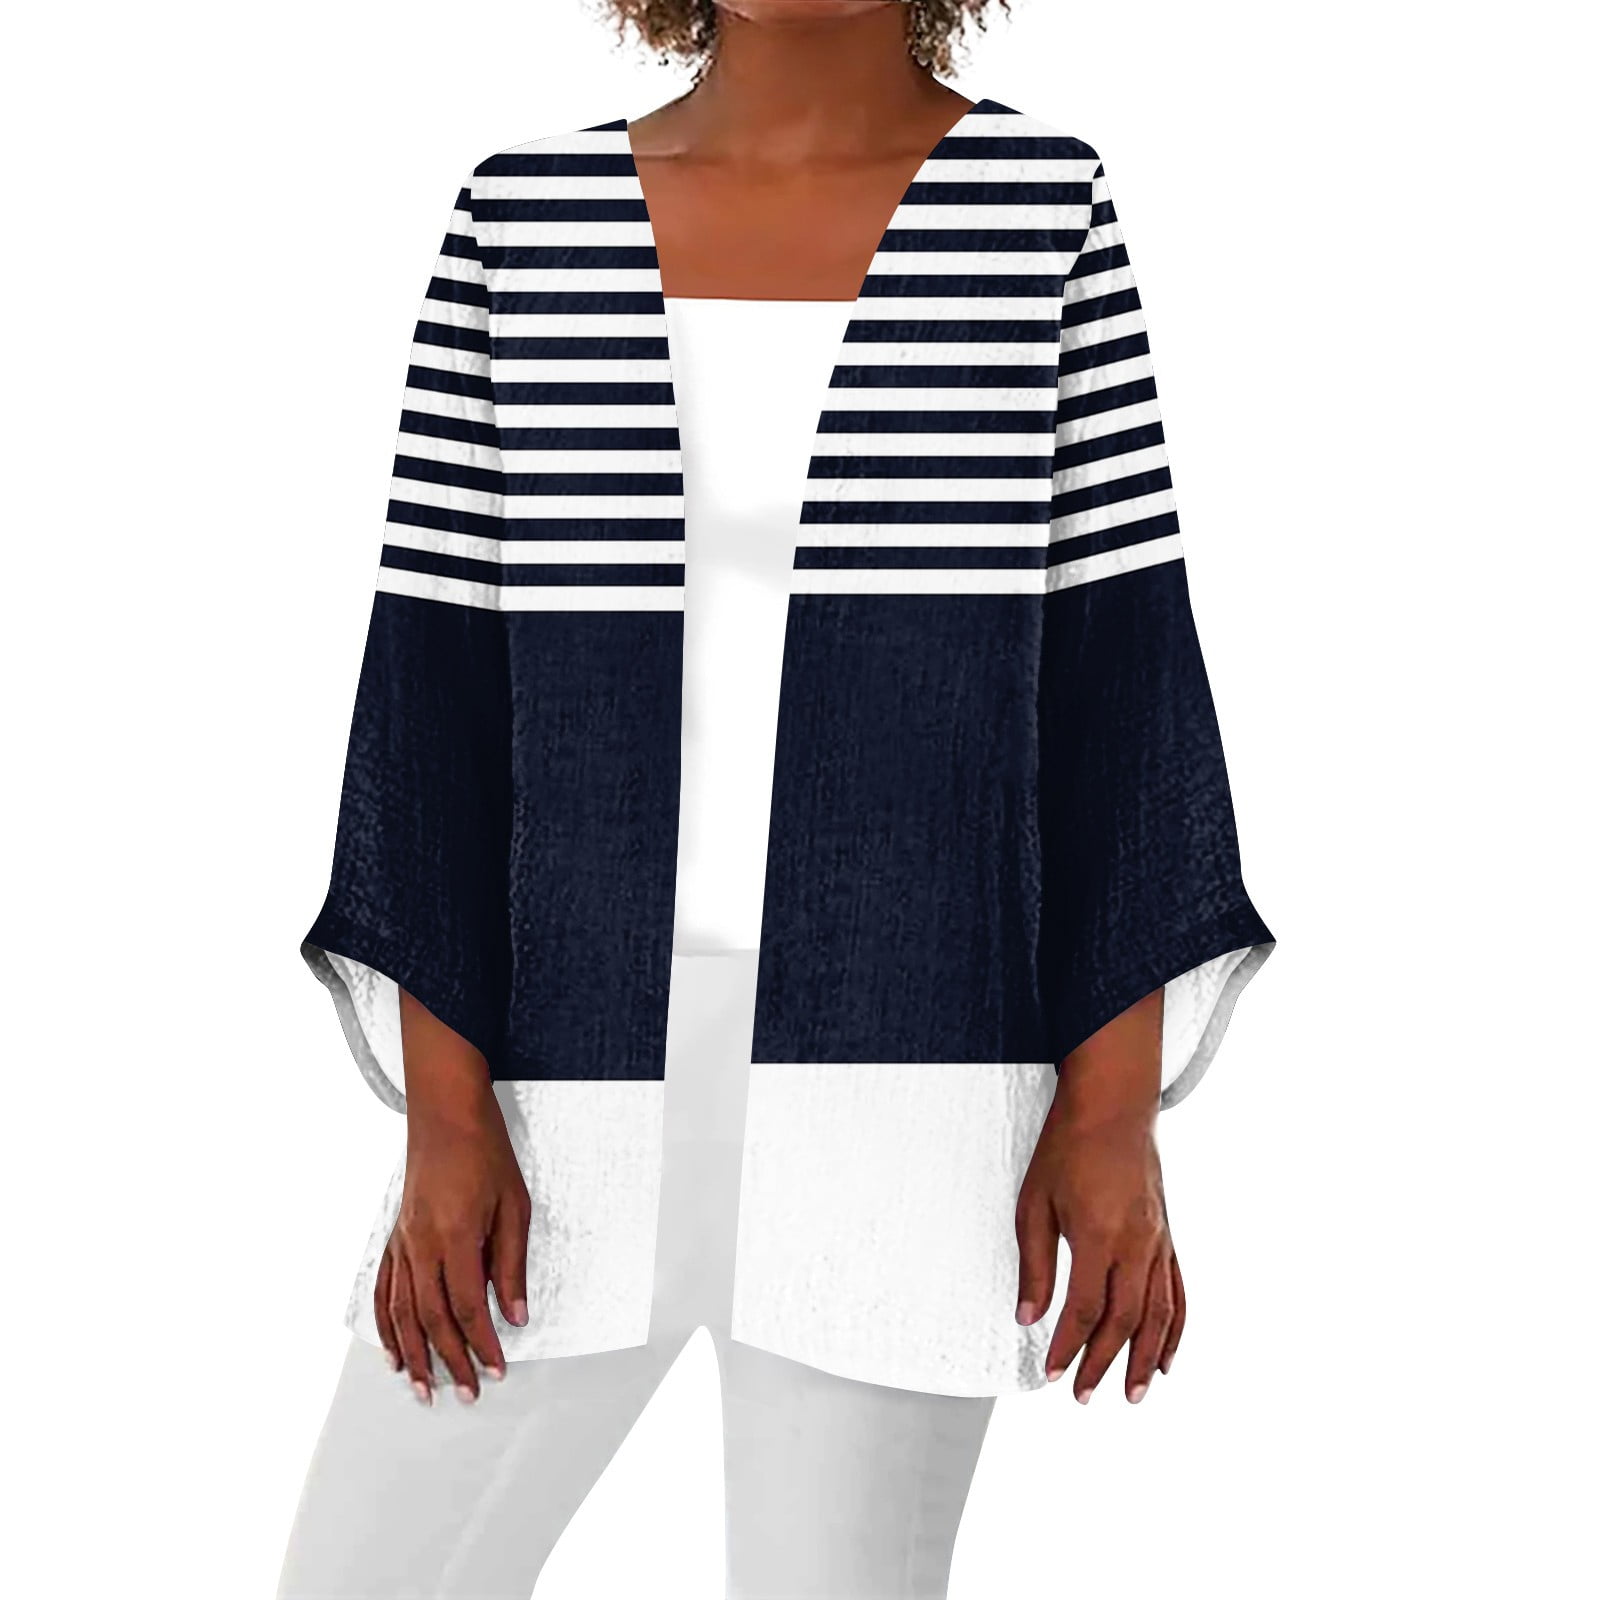 JULMCOMO Kimonos for Women Plus Size Striped Color Block Casual Lightweight  3/4 Sleeve Cardigan Soft Drape Open Front Fall Dusters Navy XL